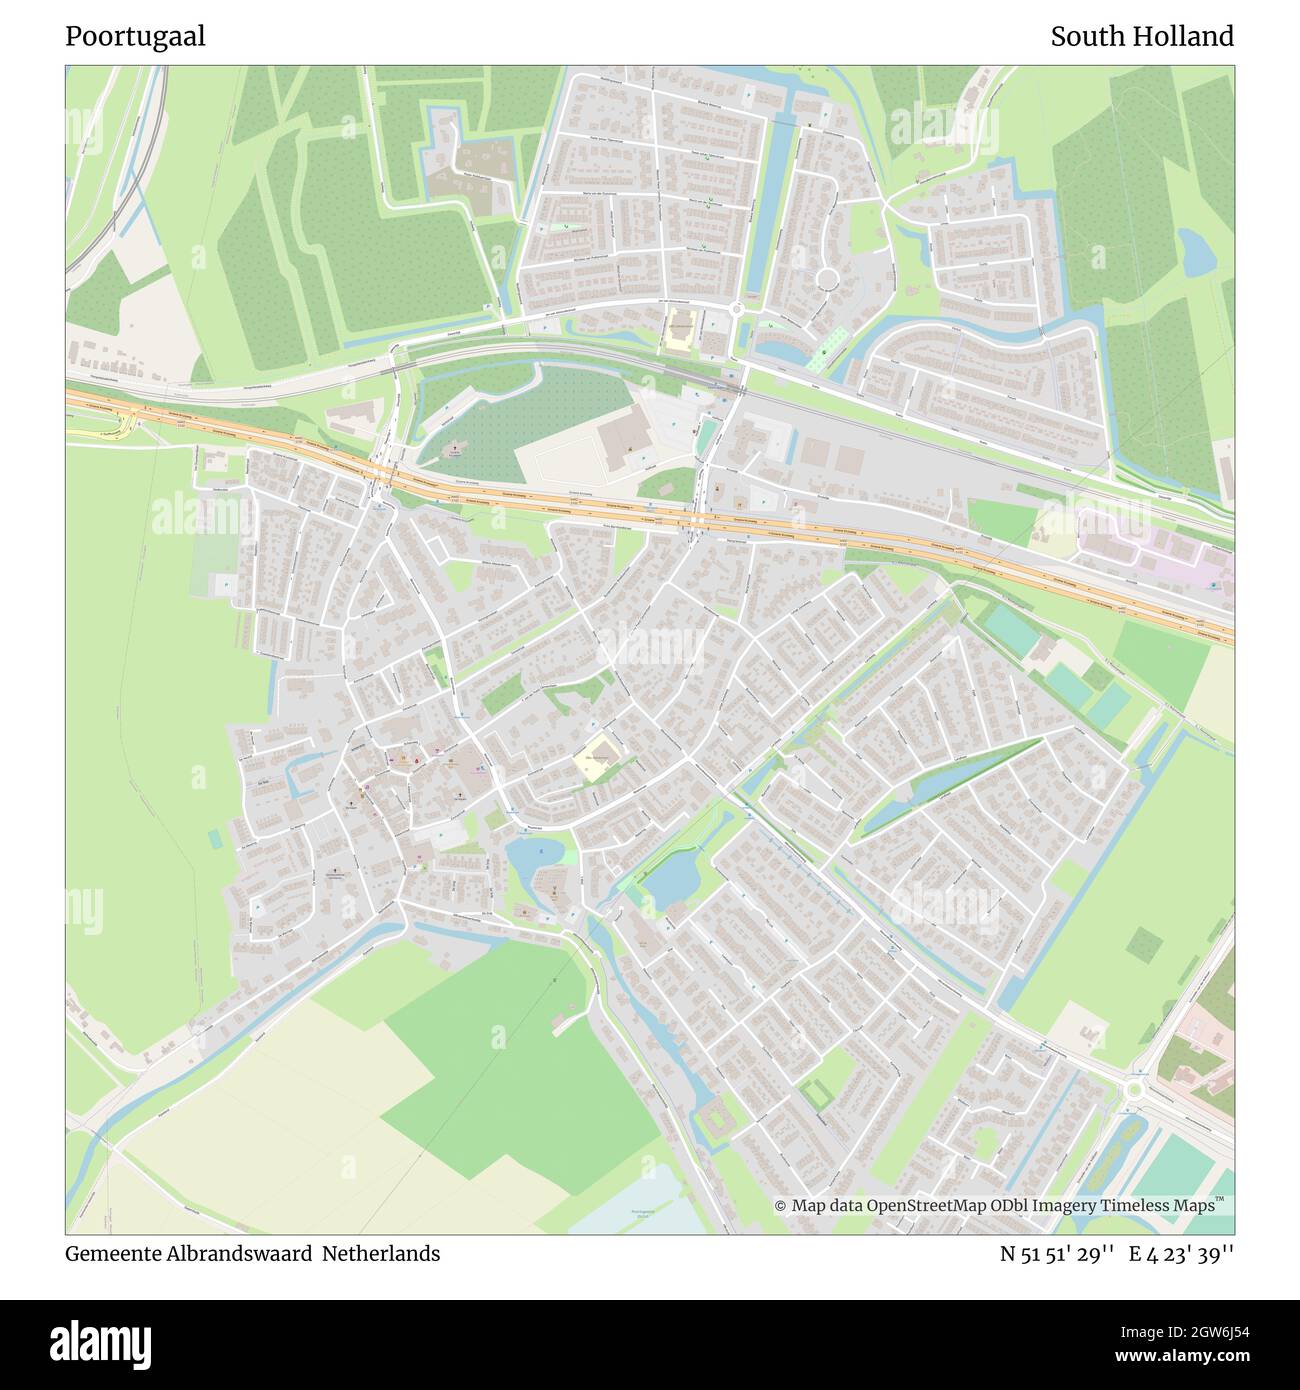 Poortugaal, Gemeente Albrandswaard, Netherlands, South Holland, N 51 51' 29'', E 4 23' 39'', map, Timeless Map published in 2021. Travelers, explorers and adventurers like Florence Nightingale, David Livingstone, Ernest Shackleton, Lewis and Clark and Sherlock Holmes relied on maps to plan travels to the world's most remote corners, Timeless Maps is mapping most locations on the globe, showing the achievement of great dreams Stock Photo